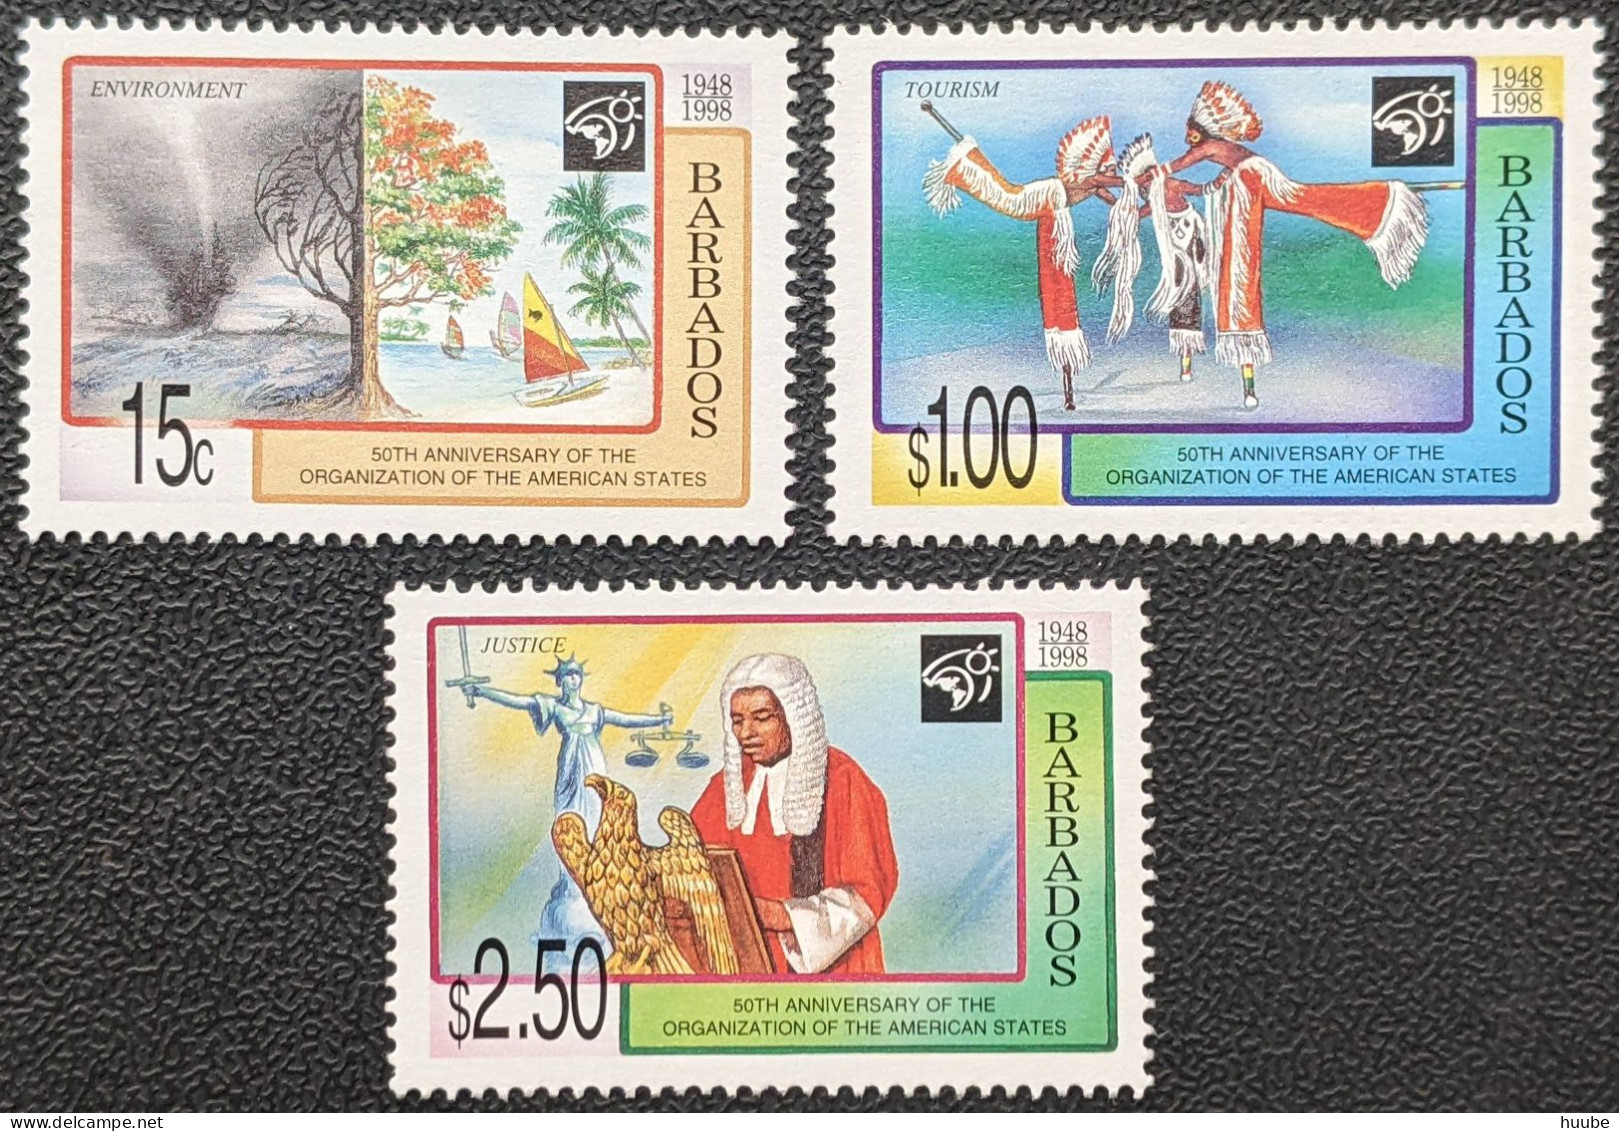 Barbados, 1998, Mi 940-942, 50th Anniversary Of Organization Of American States,  Dancers In Native Costumes, 3v, MNH - Danse